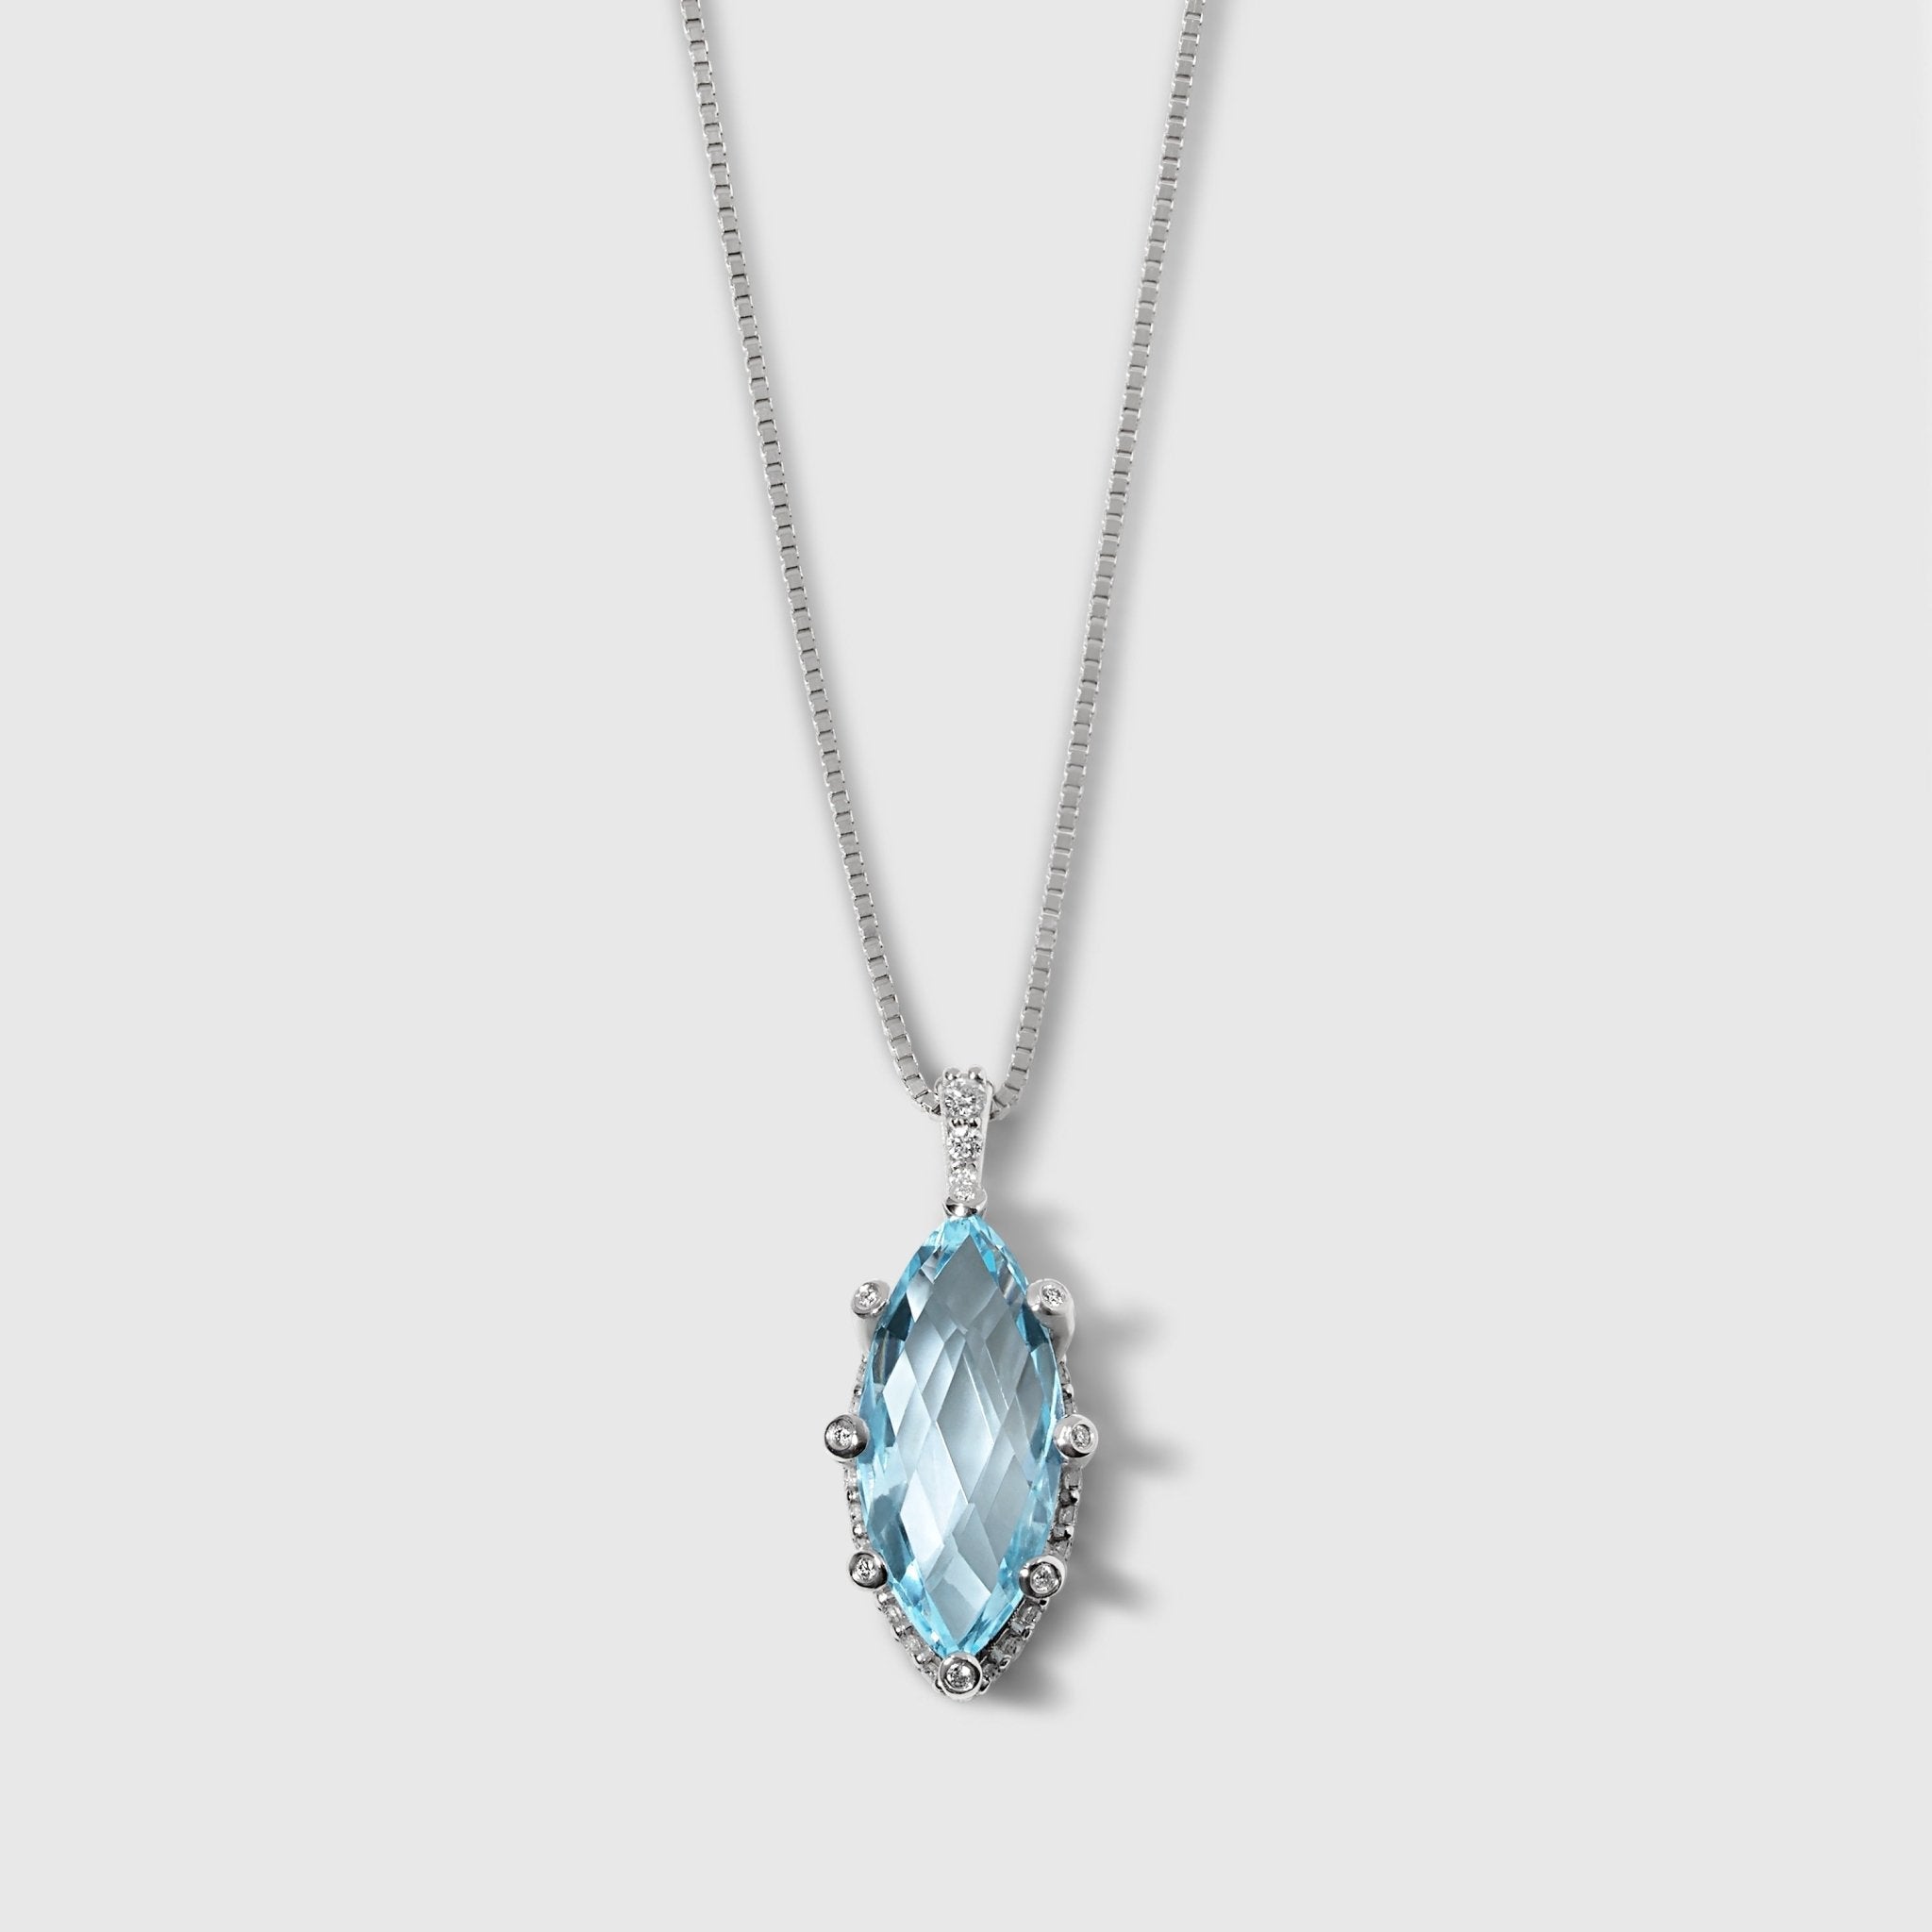 Sky-Blue Topaz & White Diamonds - Marquise Pendant & Necklace in Solid White Gold – SkyTower Set - Aurora Laffite Jewelry